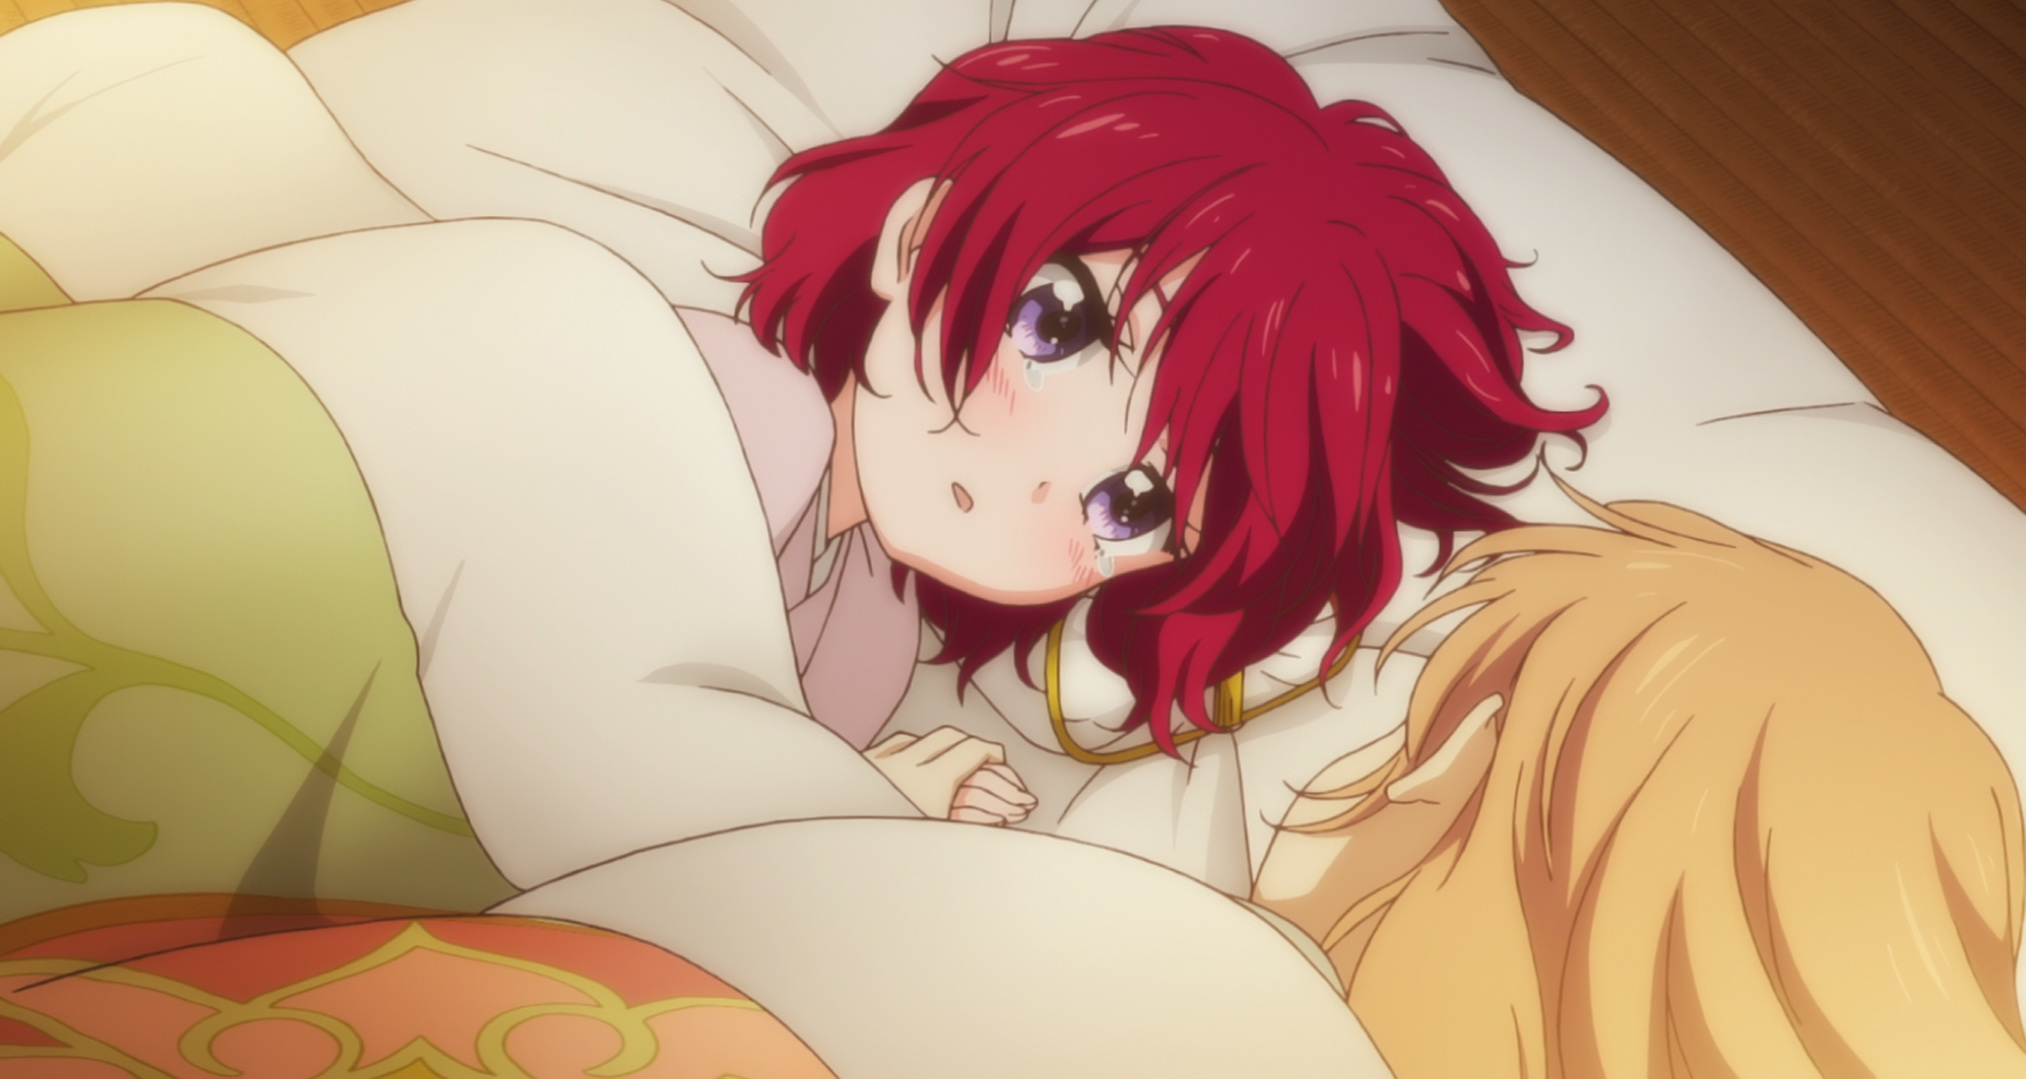 Today’s posting of Akatsuki no Yona is being done by a special request. 